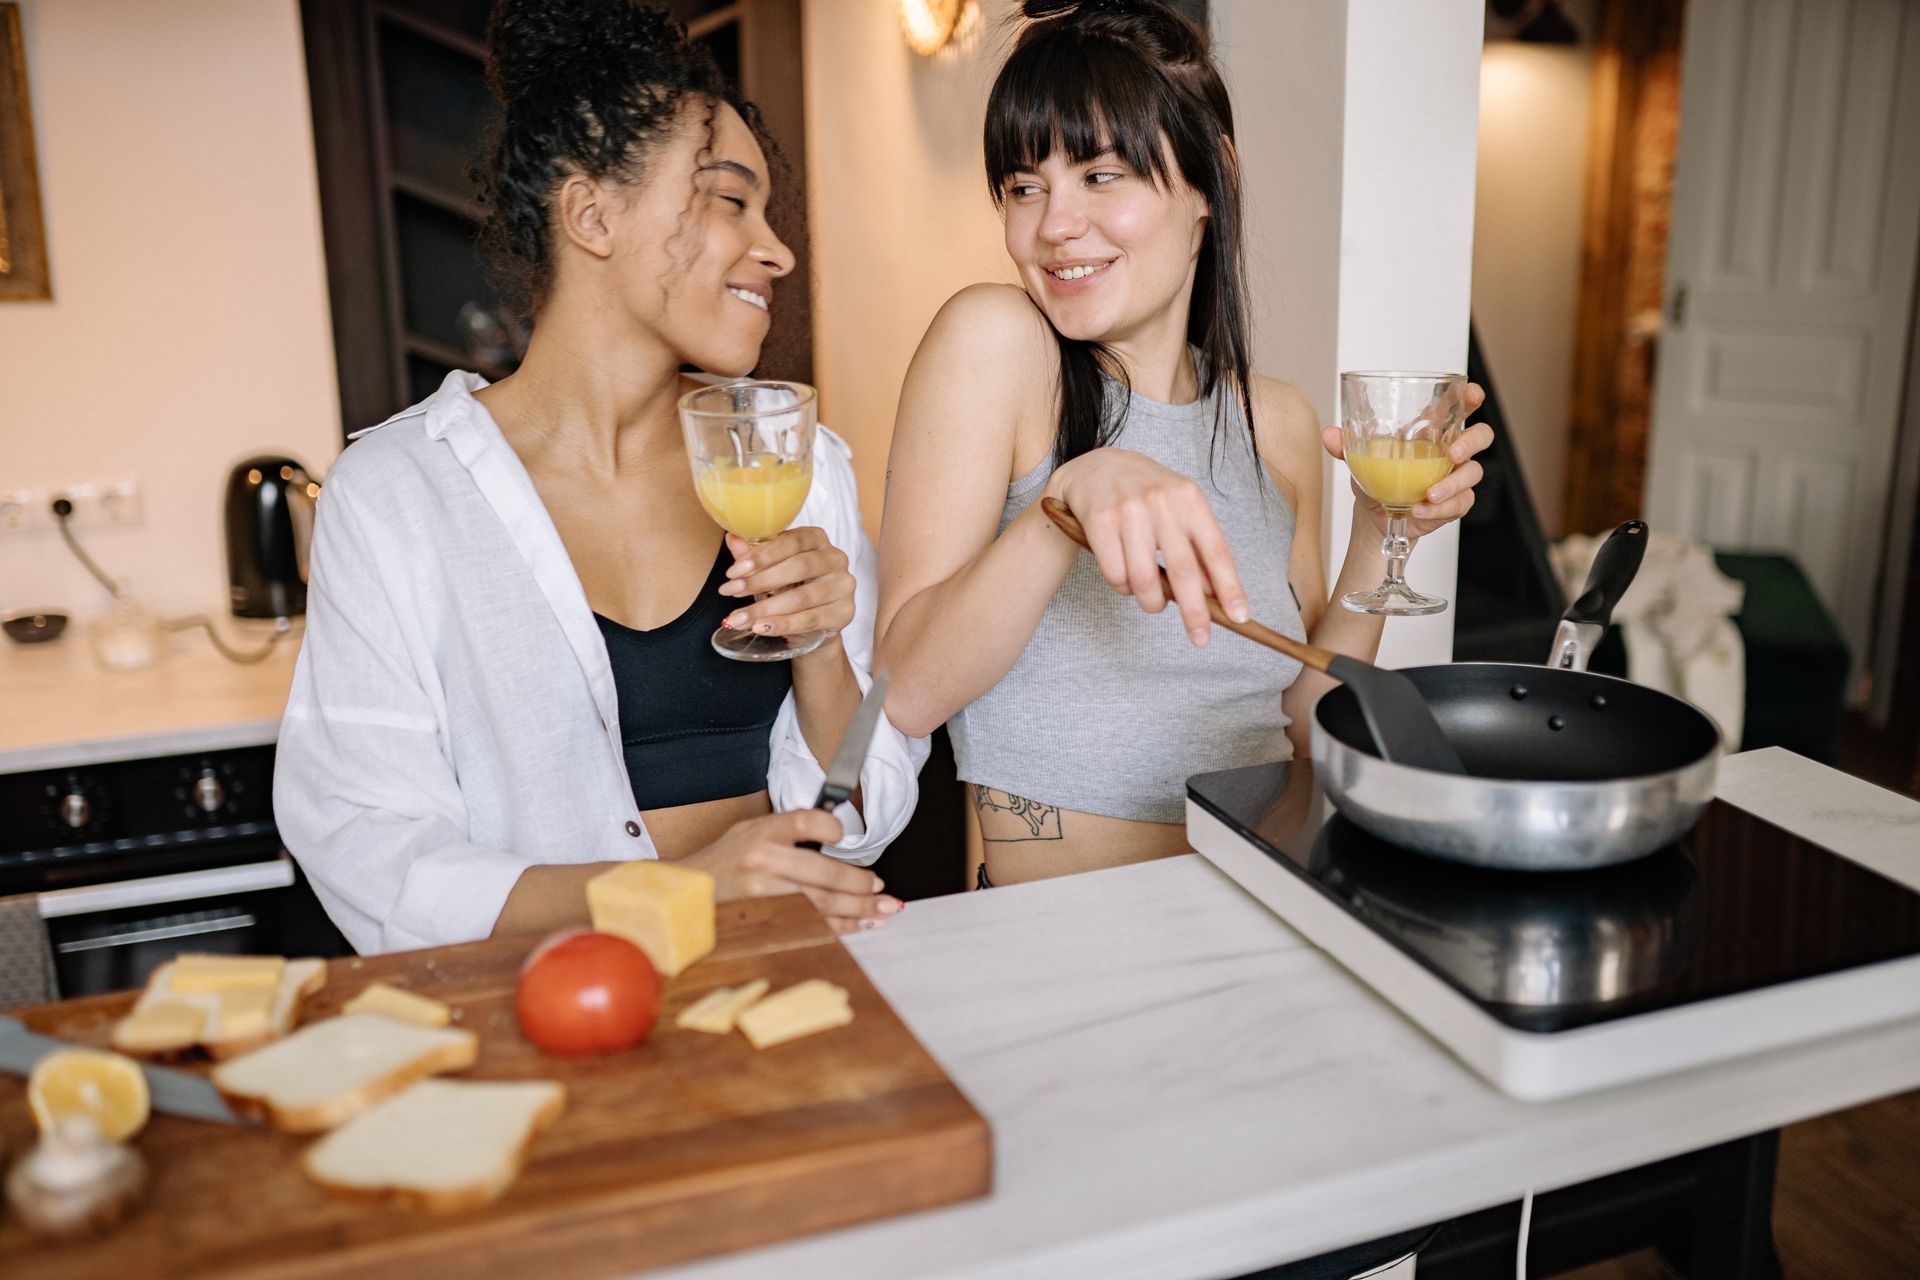 Two women are cooking together in a kitchen and drinking wine.